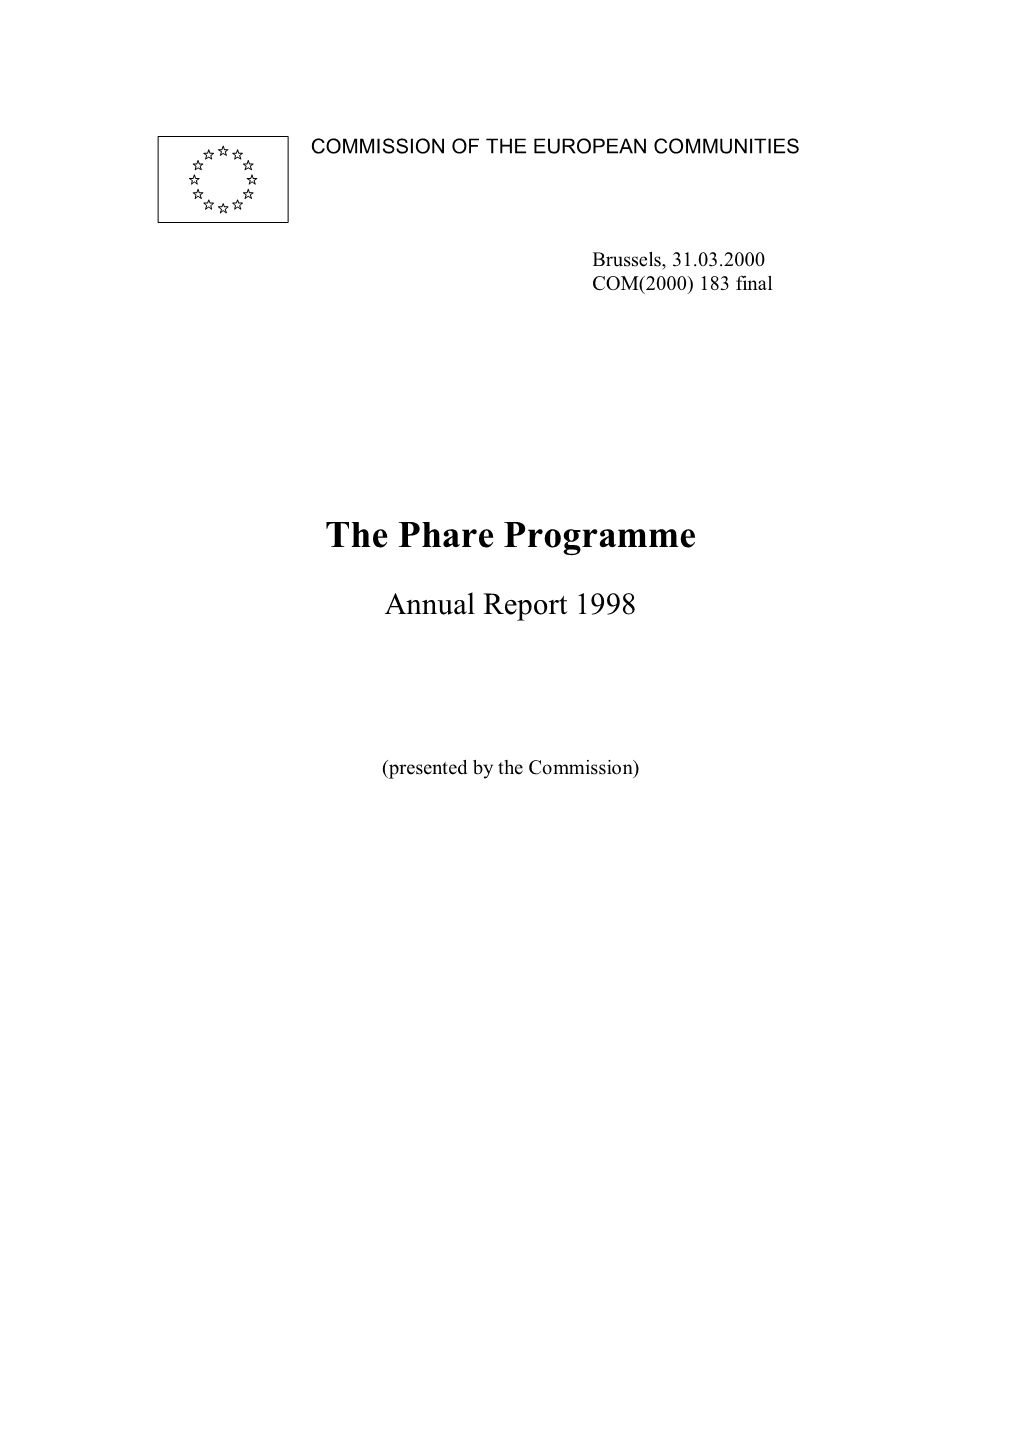 The Phare Programme